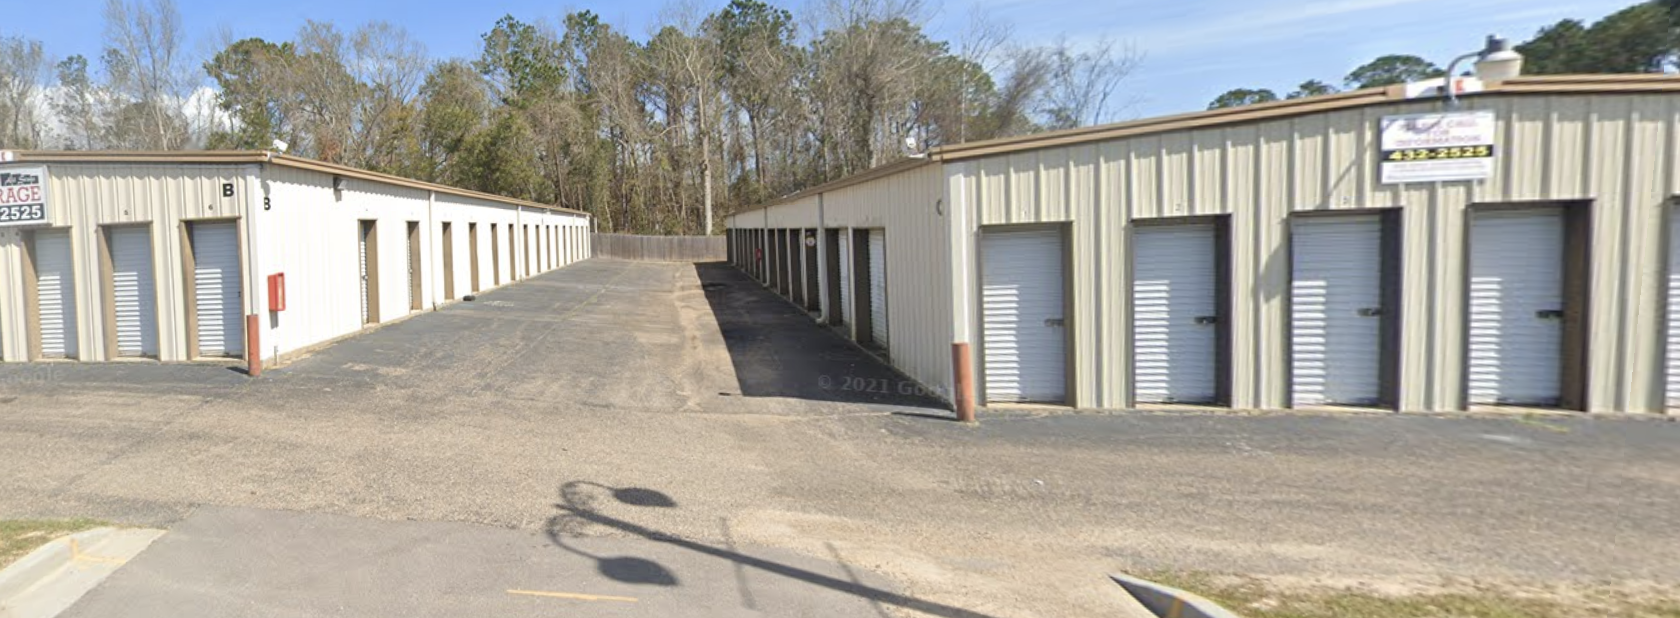 Drive Up Access in D'Iberville, MS